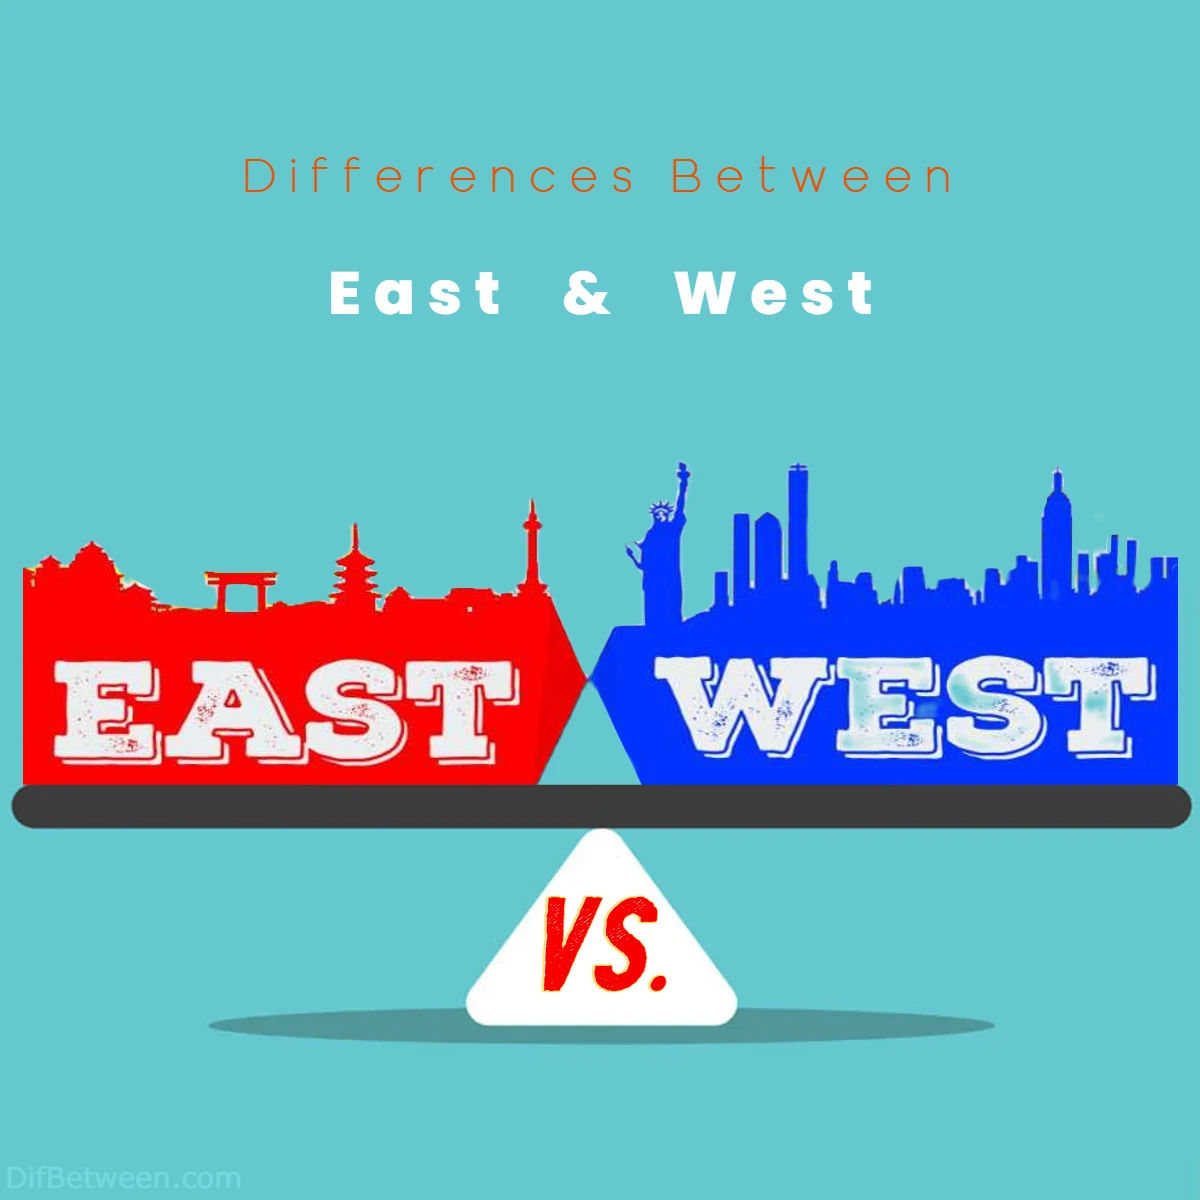 Differences Between East vs West